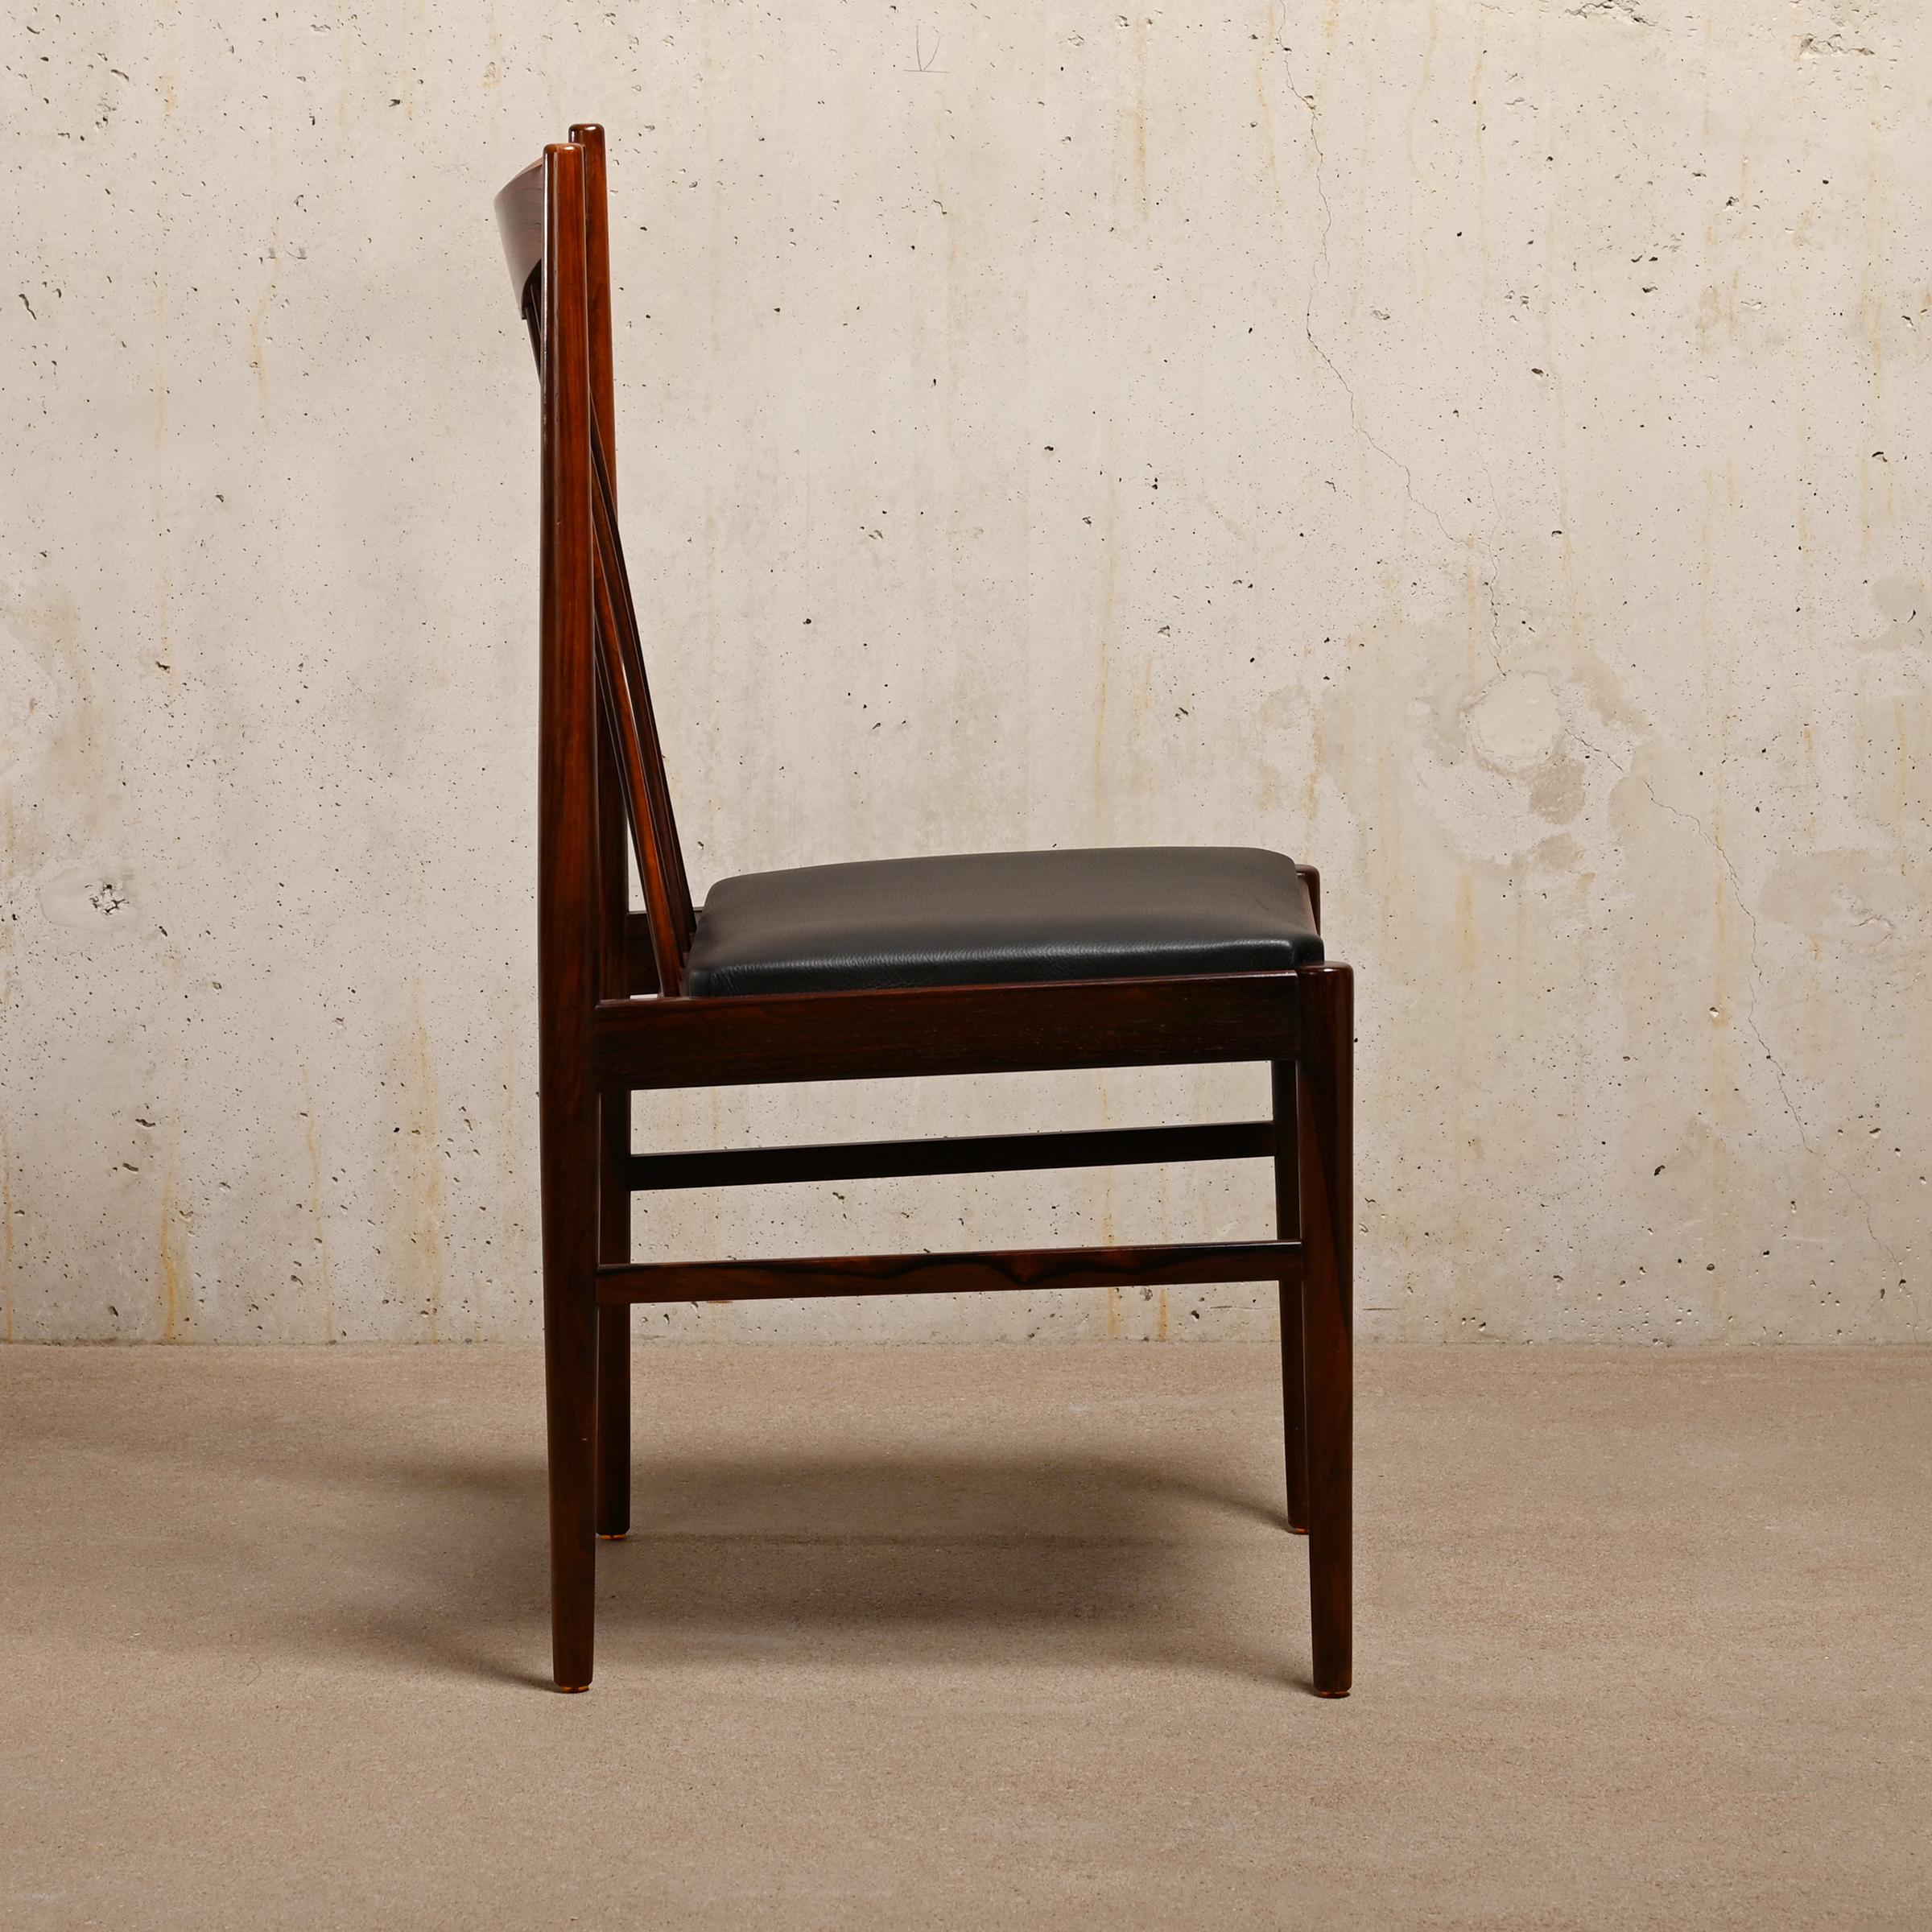 Mid-20th Century Arne Vodder Brazilian Rosewood Dining Chairs Model 422 for Sibast Furniture